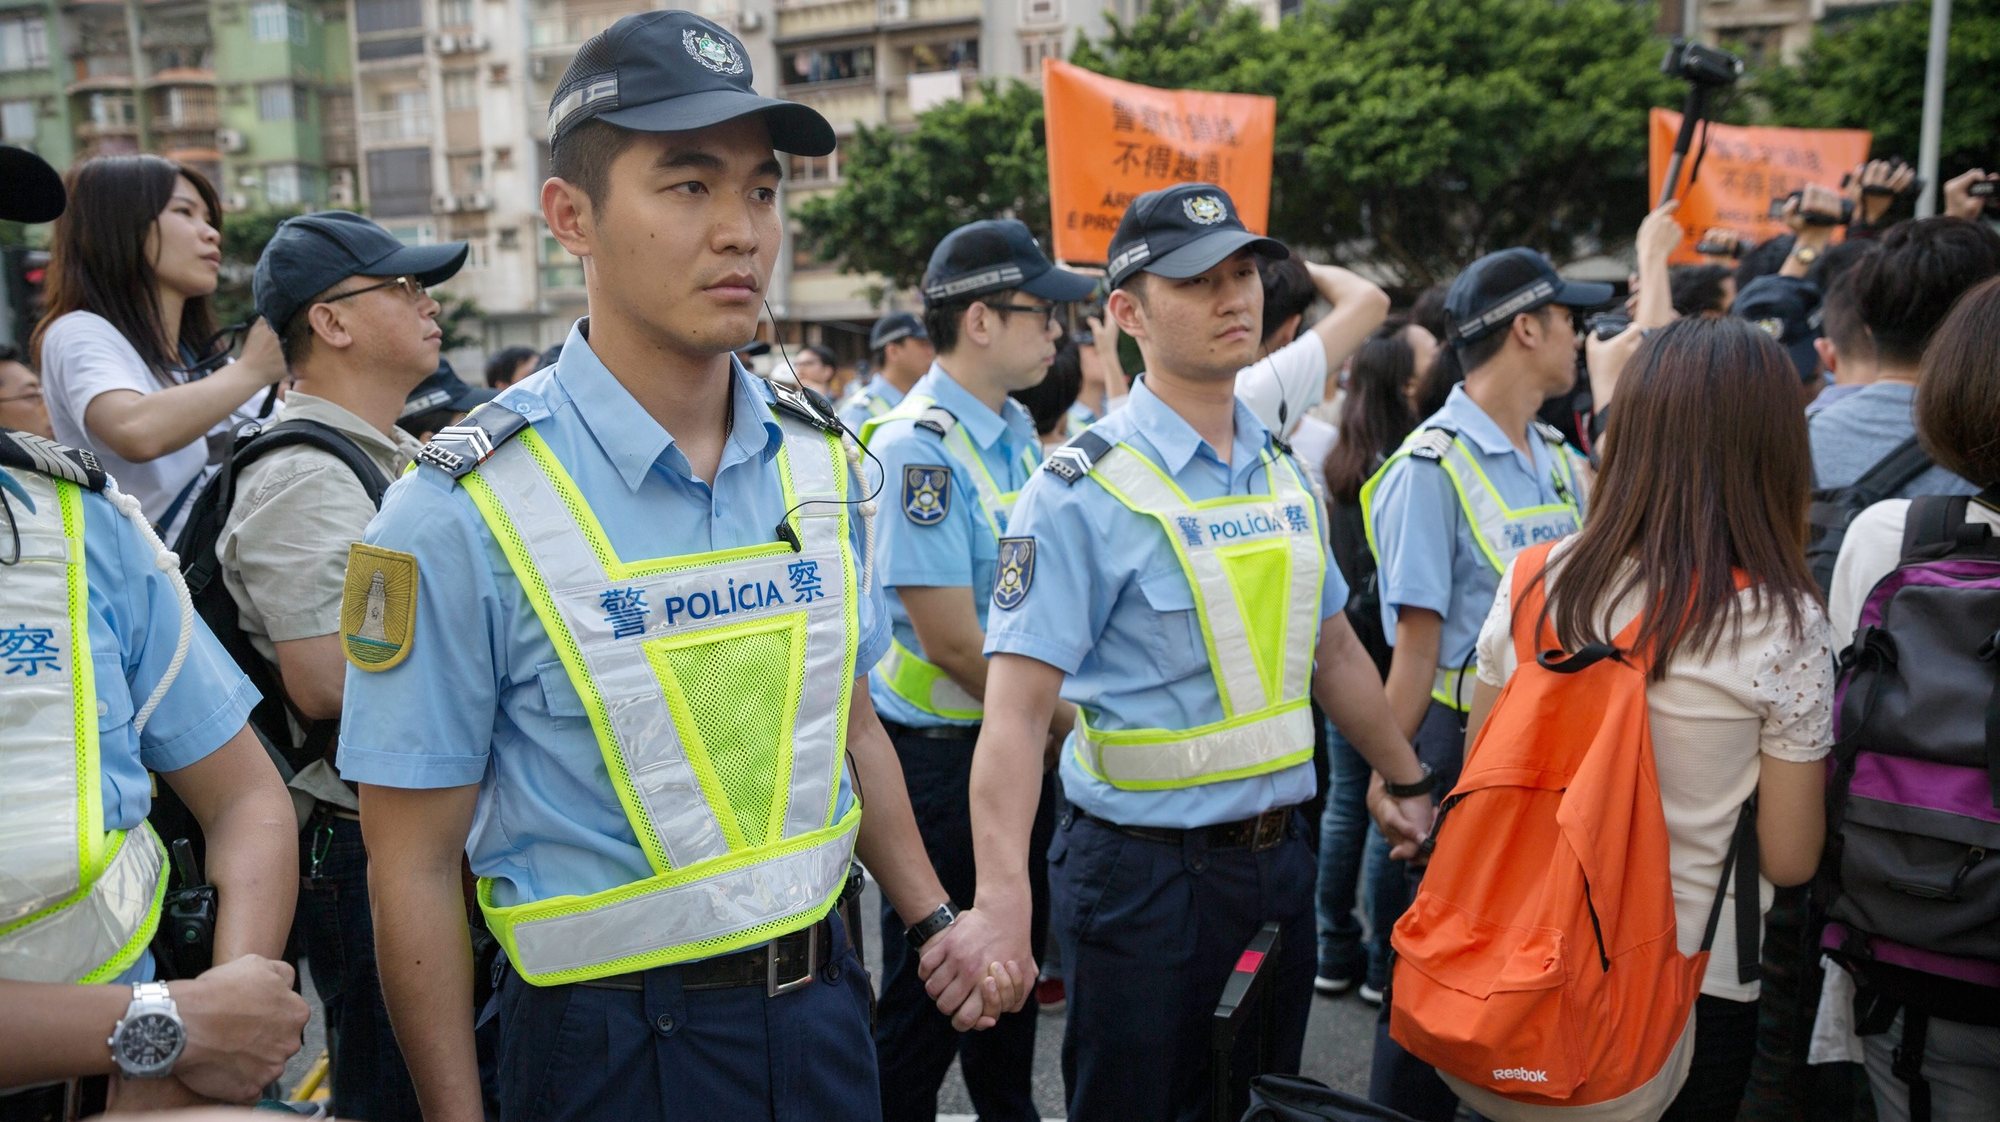 epa05307428 Macau police officers form a line to contain protesters during a march against Macau Chief Executive Fernando Chui Sai On&#039;s decision to donate public money to a Chinese university during a rally in Macau, China, 15 May 2016. Protesters urged the government to rescind its 100 million yuan, 13.5 million euros, donation from the Macao Foundation, a government organisation, to Jinan University in China. Chui is the president of the trustees&#039; council of Macao Foundation and he has also been a vice-chairman of the board of Jinan University since 2010.  EPA/JEROME FAVRE